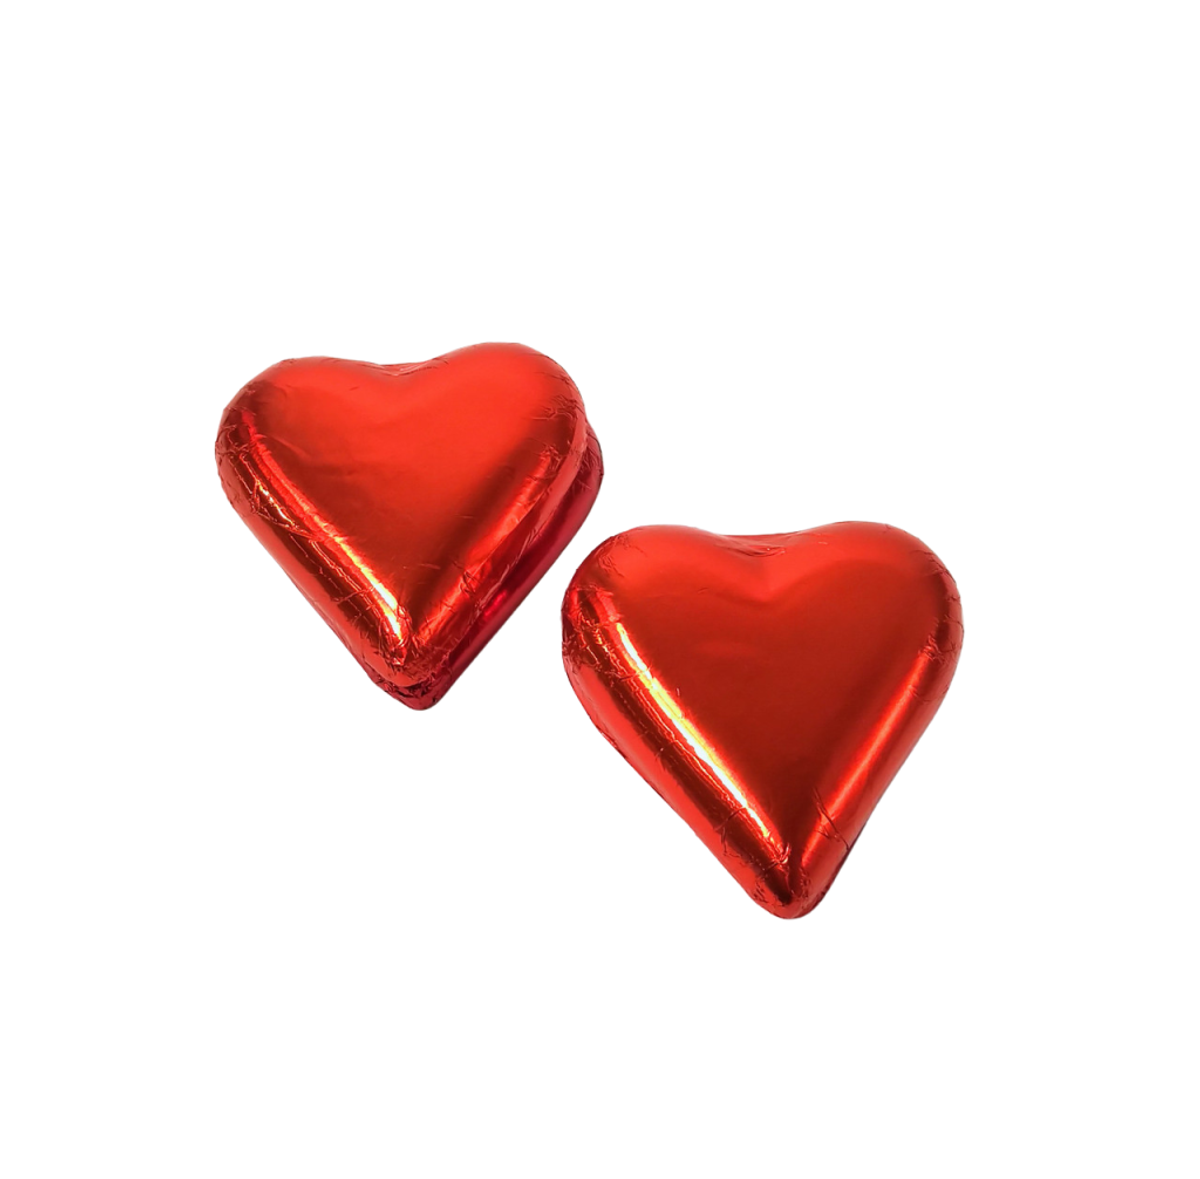 Solid Chocolate Heart - Milk or Dark wrapped in red foil - Lb 0.055 (3"x 3"x1") 